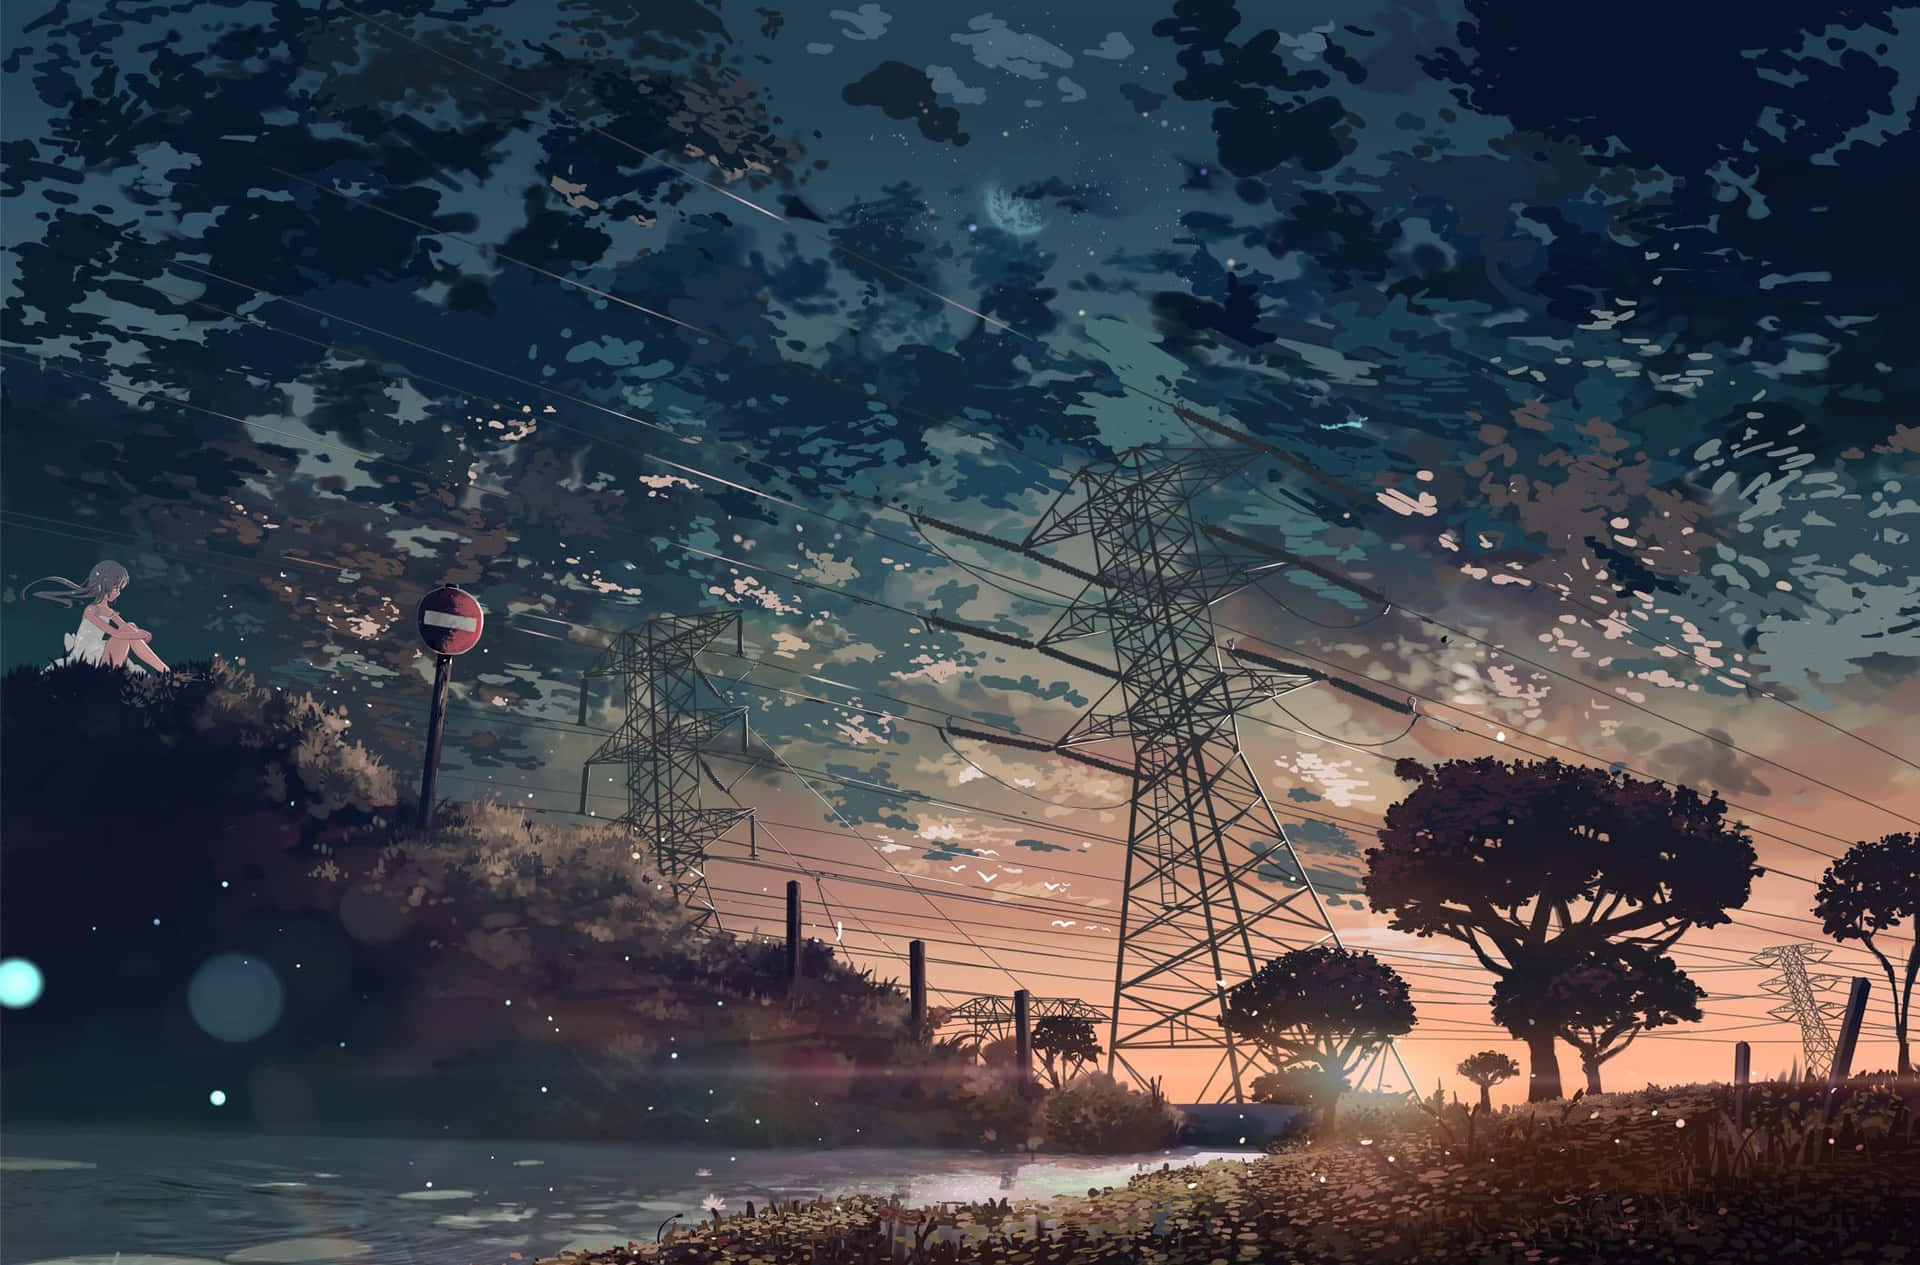 A beautiful sunset over a power line with a bird flying by - Desktop, anime, scenery